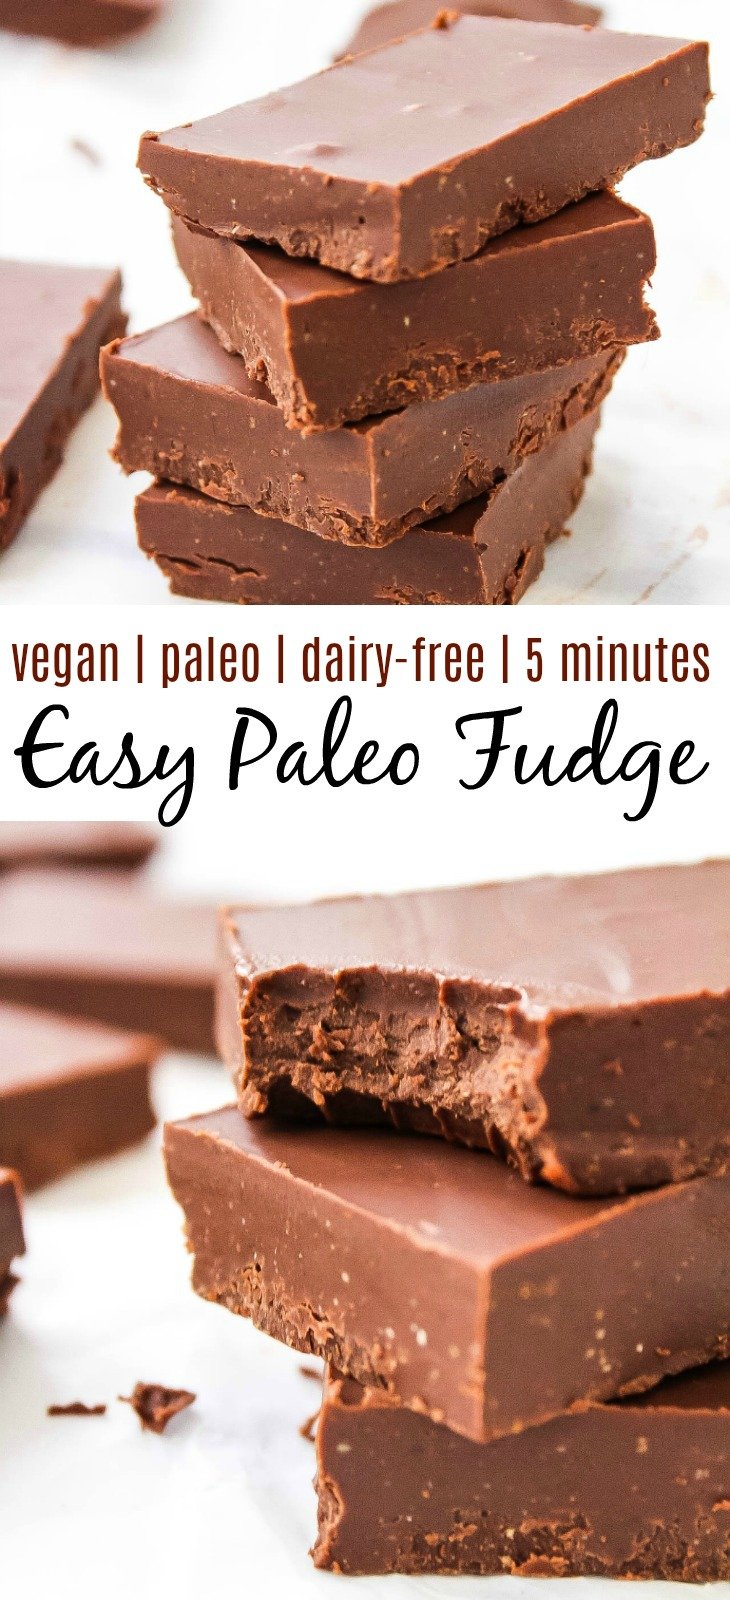 This easy paleo chocolate fudge only needs 5 minutes of your time before you've got a sweet, healthy treat. It's a vegan chocolate fudge, so it's totally dairy-free! Add some maple syrup in for a maple chocolate fudge too! #paleochocolatefudge #veganchocolatefudge #2ingredientfudge